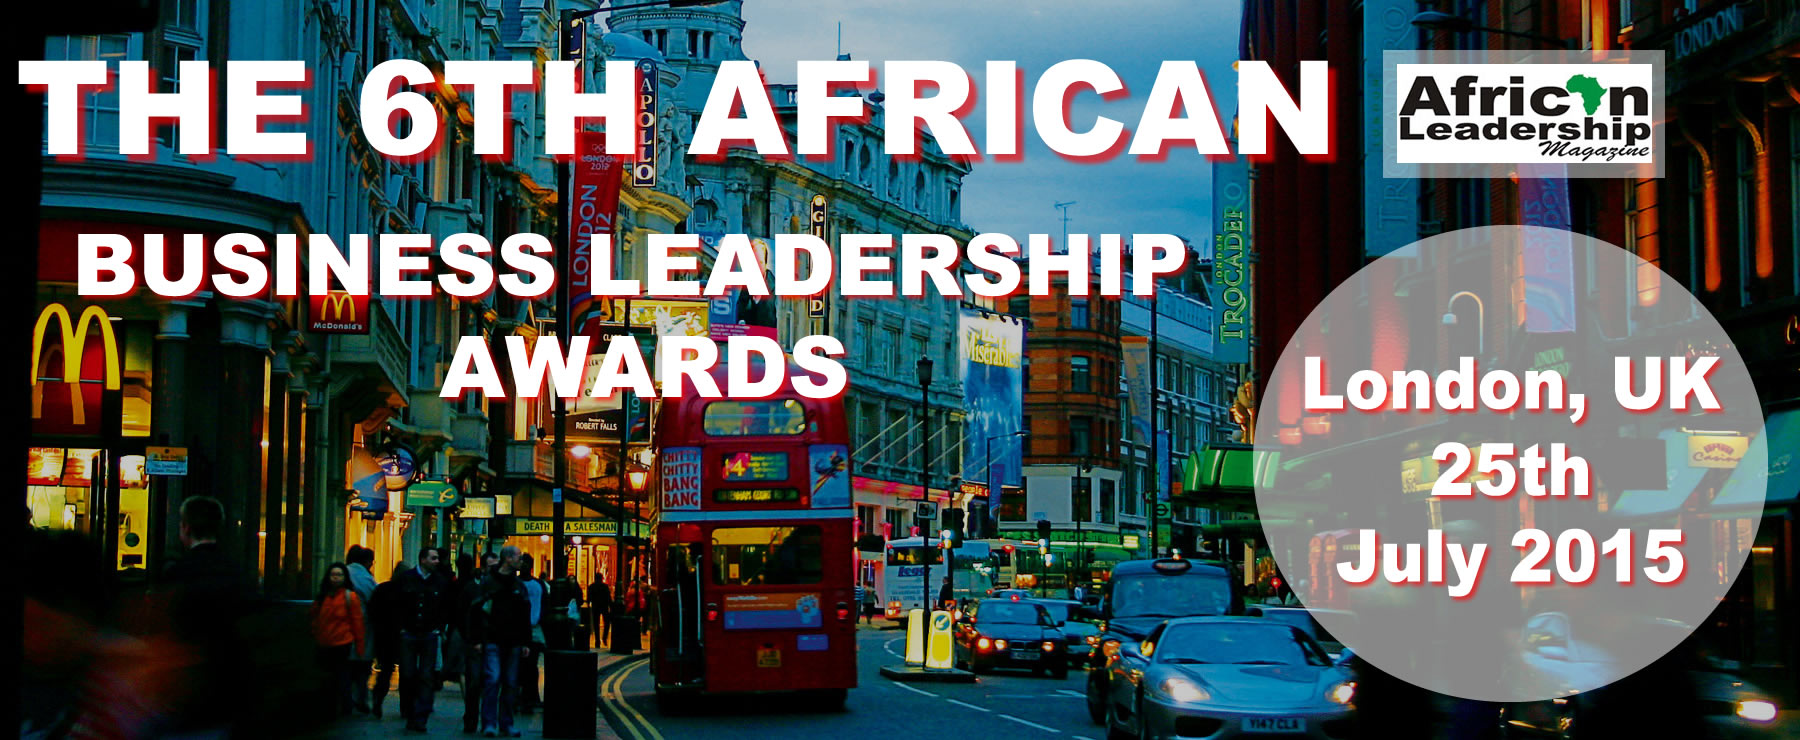 The 6th African Business Leadership Awards, London, UK